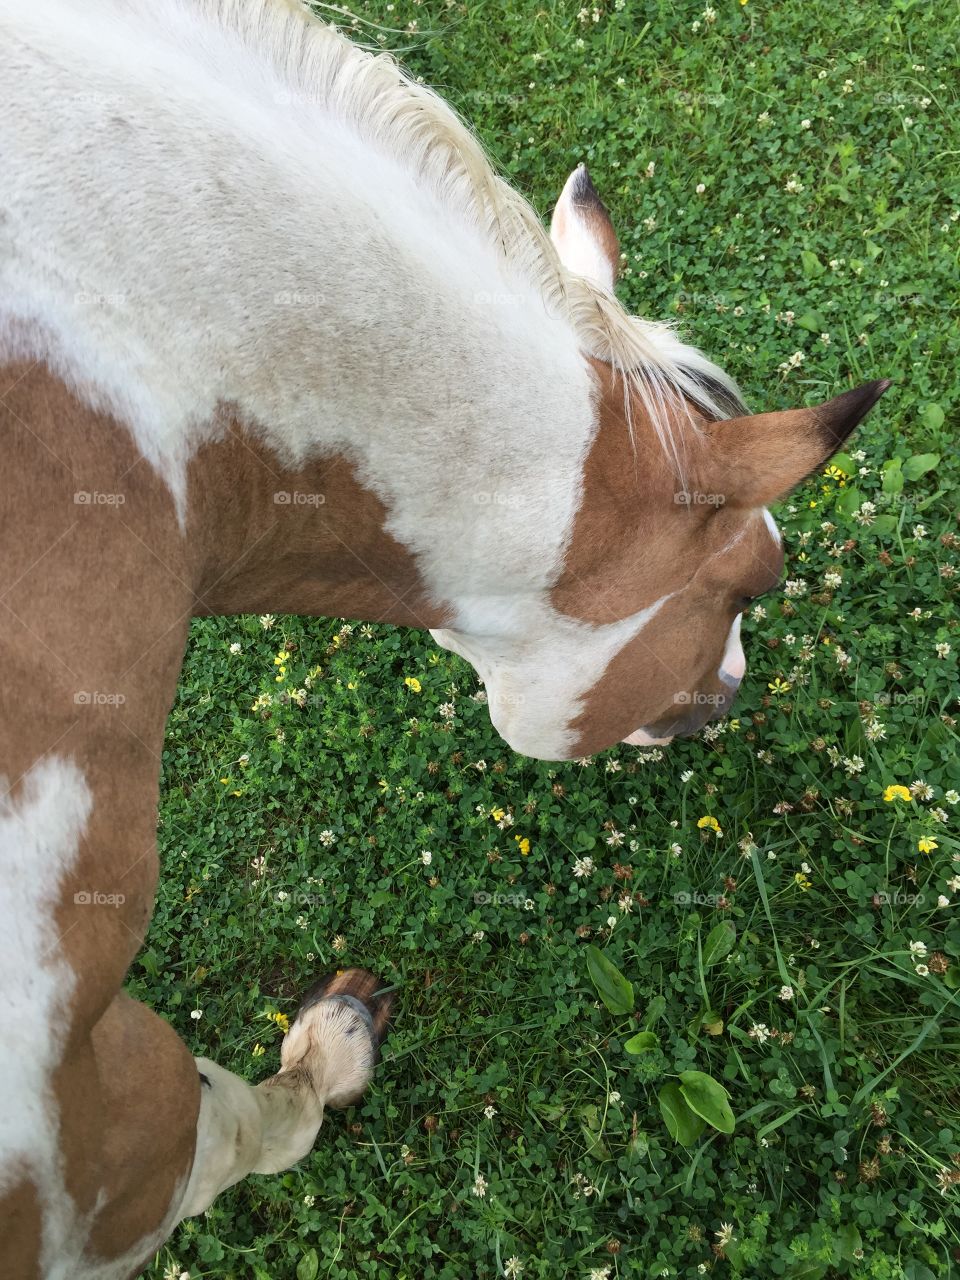 View looking down a white and tan paint horse's neck as he grazes